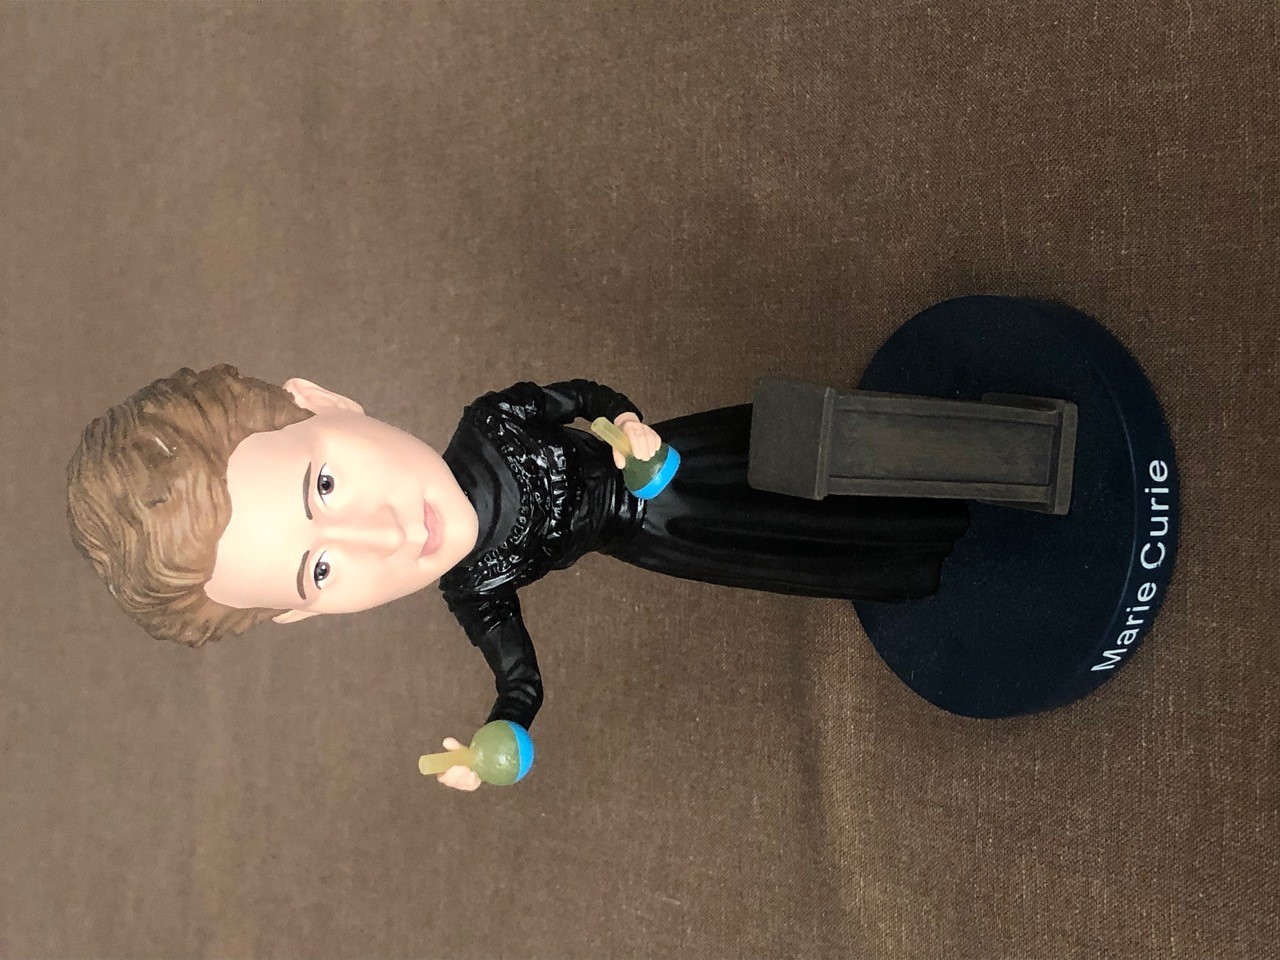 A bobblehead of Marie Curie